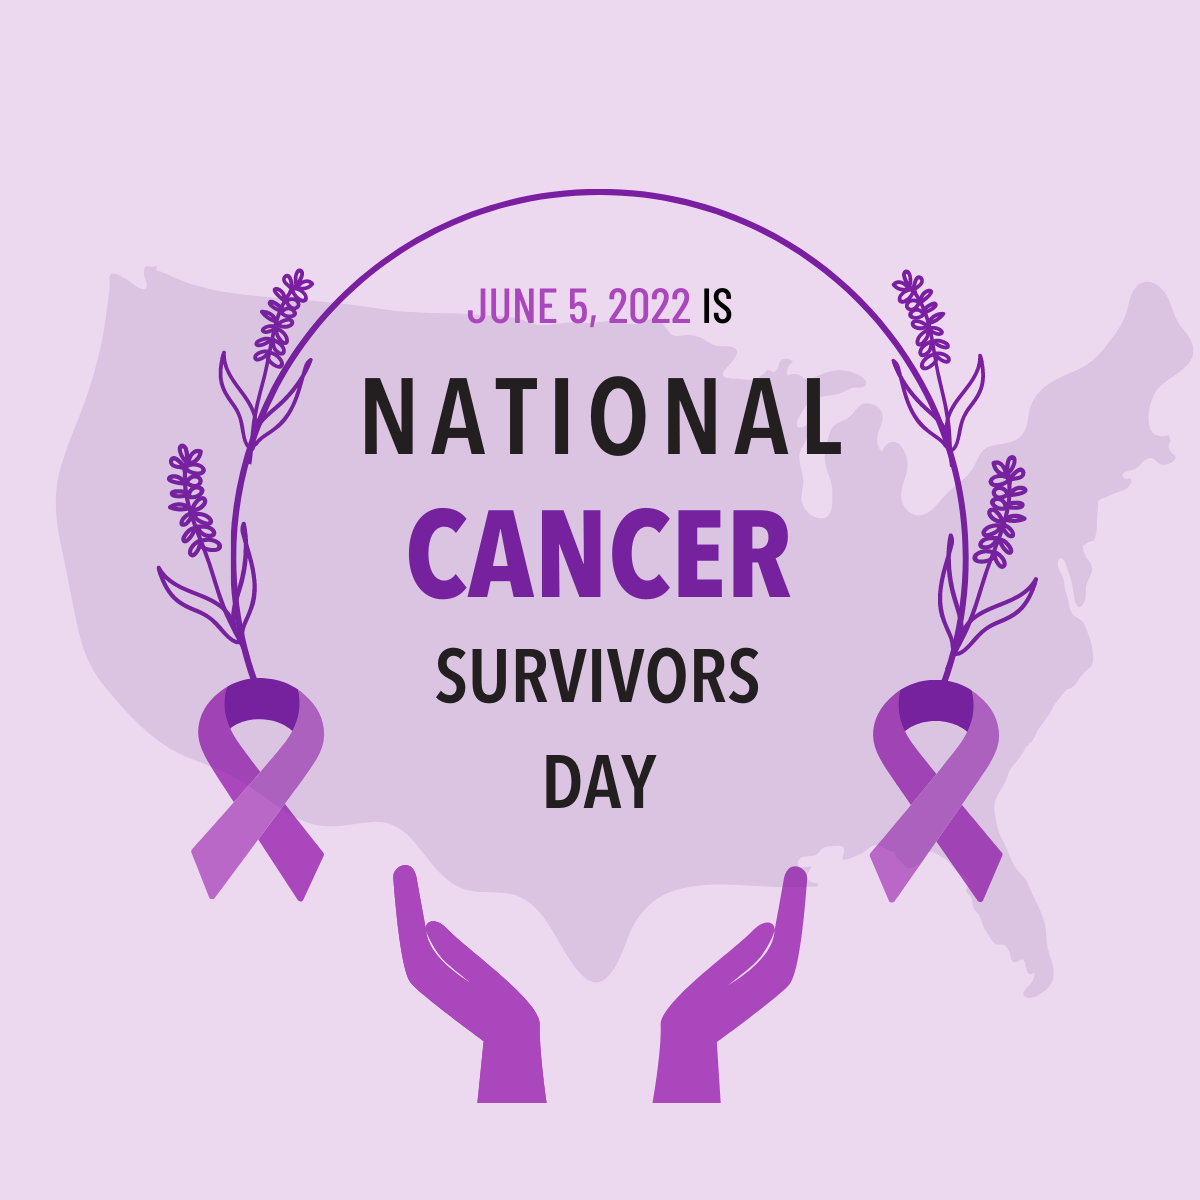 Image of purple cancer ribbons, purple hands overlaid on transparent image of the U.S. Text overlay reads: June 5, 2022 is National Cancer Survivors Day